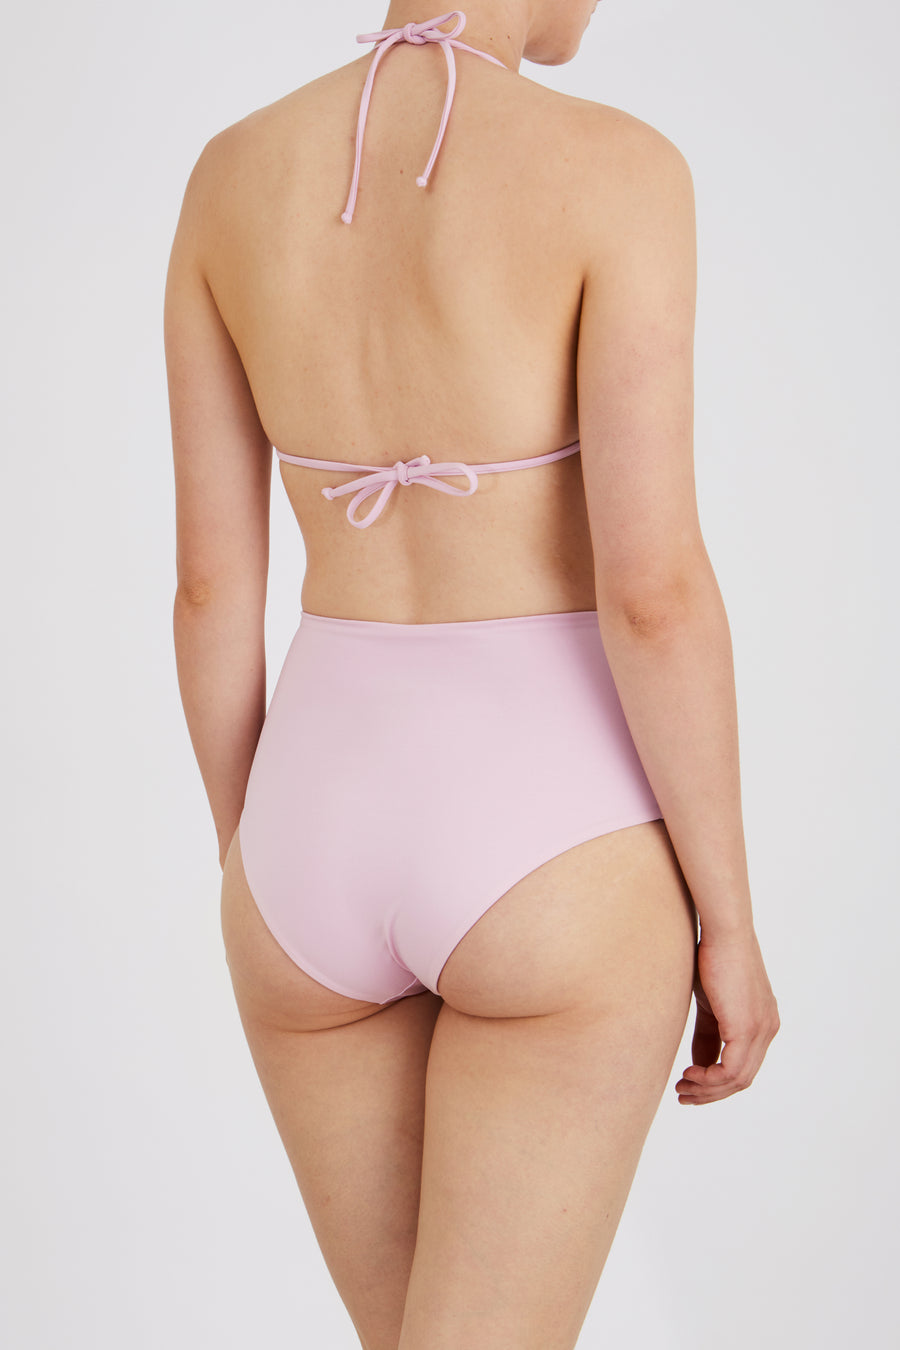 TOP – triangle, pink